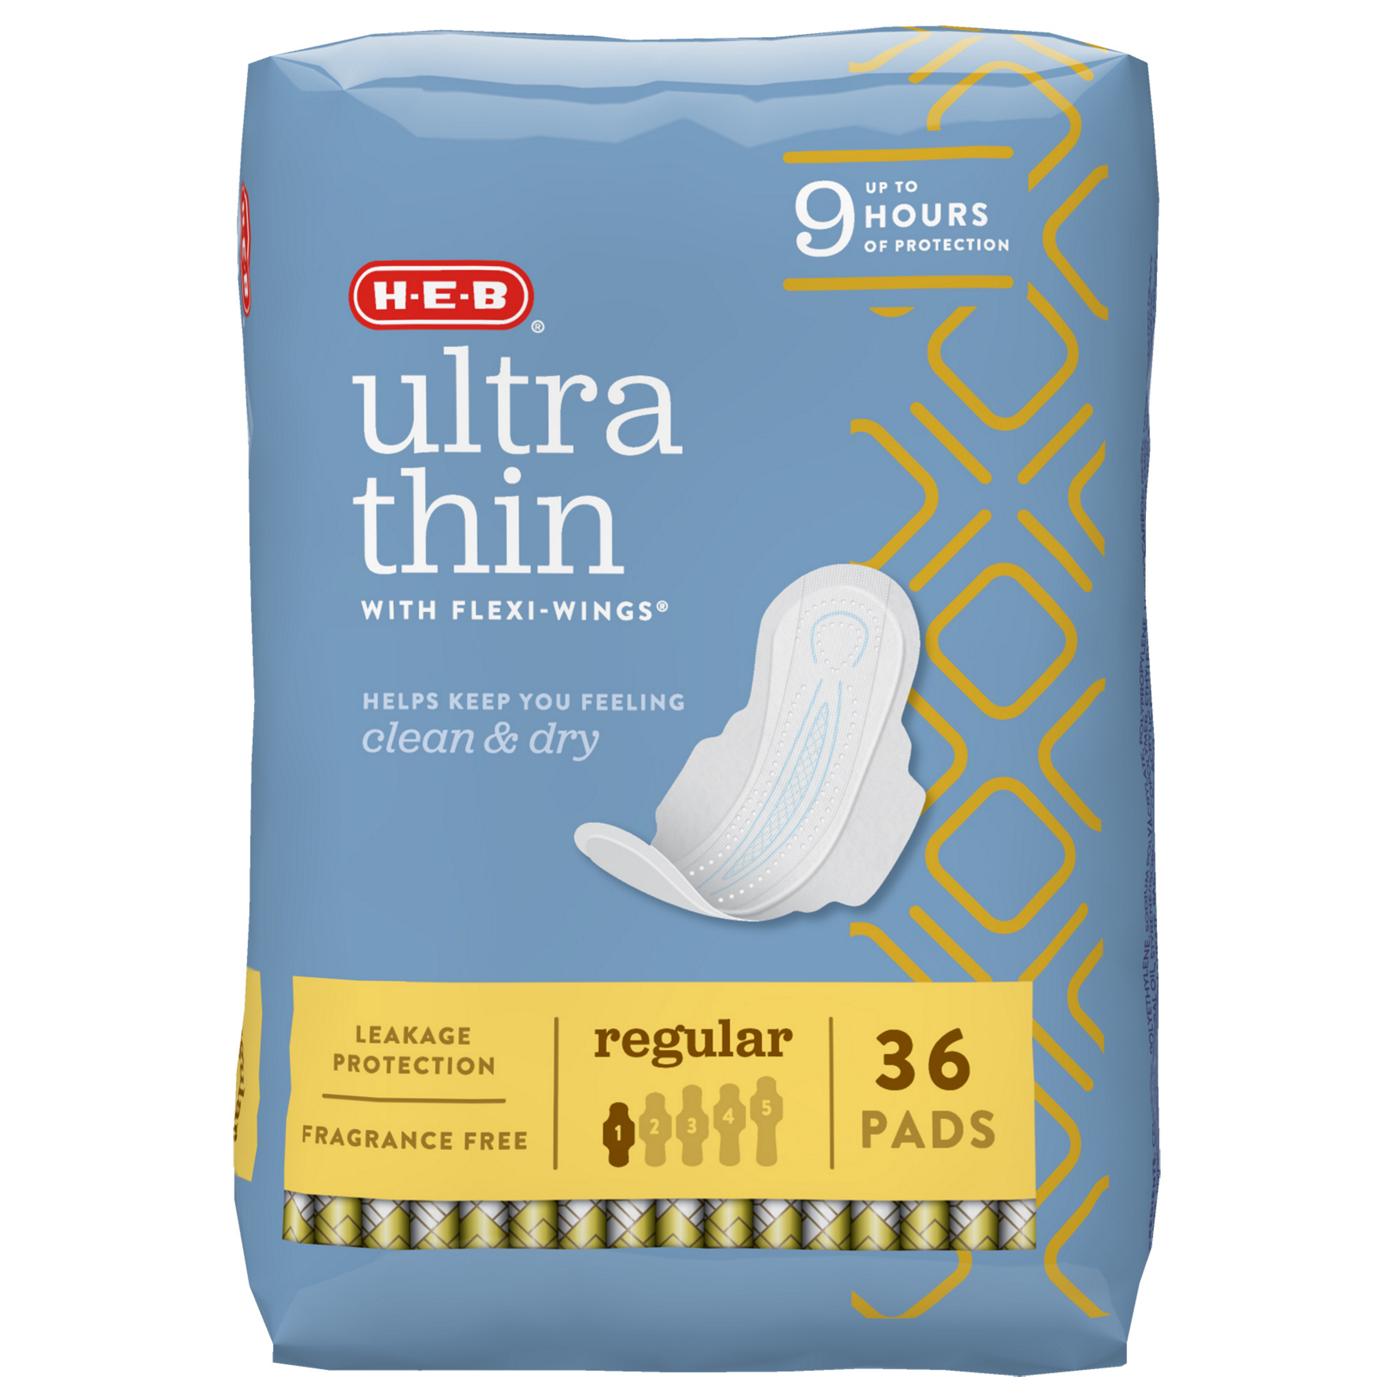 H-E-B Ultra Thin with Flexi-Wings Pads - Regular; image 1 of 7